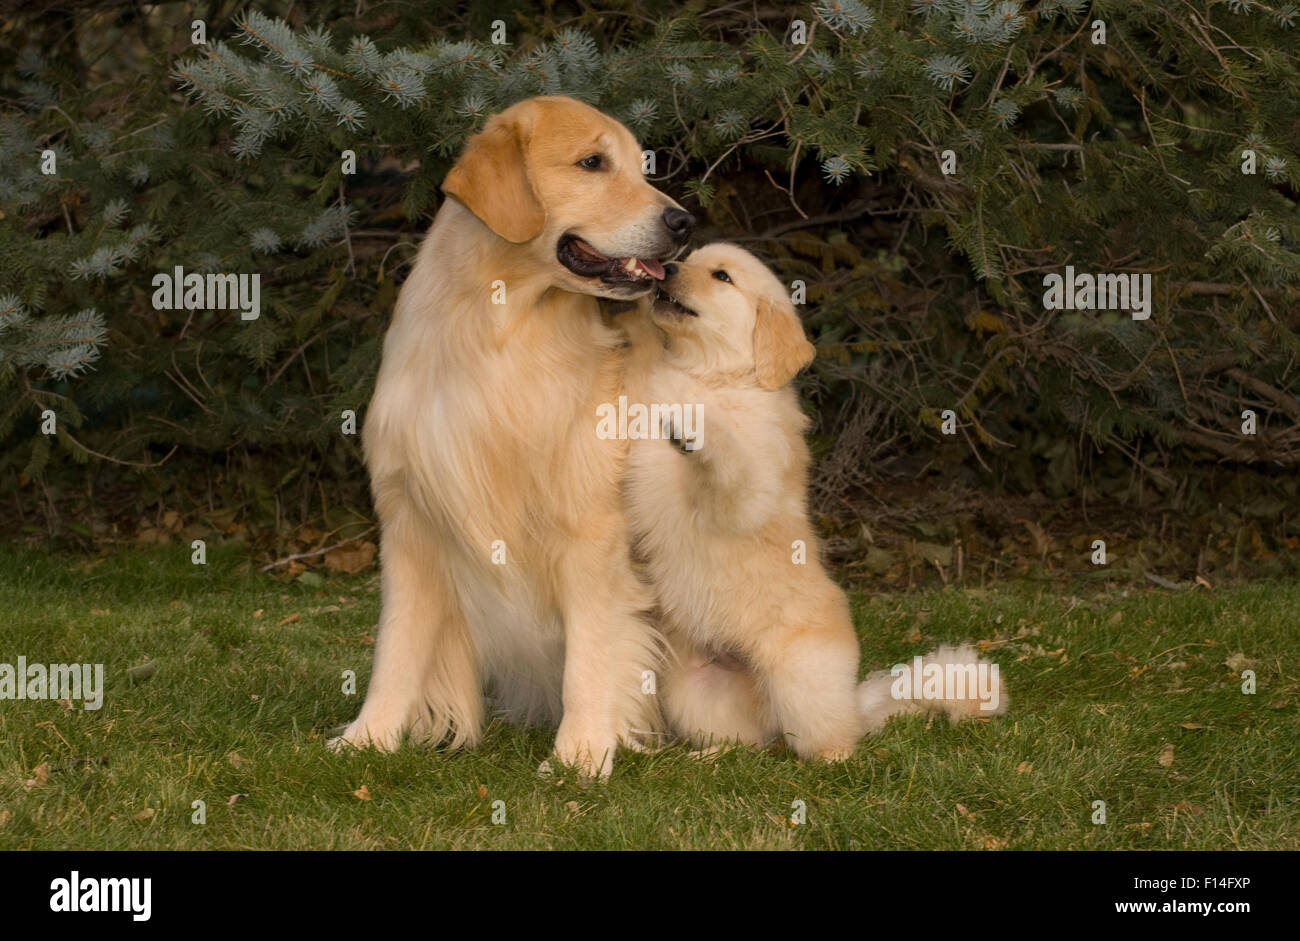 GOLDEN RETRIEVER PUPPY STANDING WITH PAW ON ADULT DOG’S BACK Stock Photo